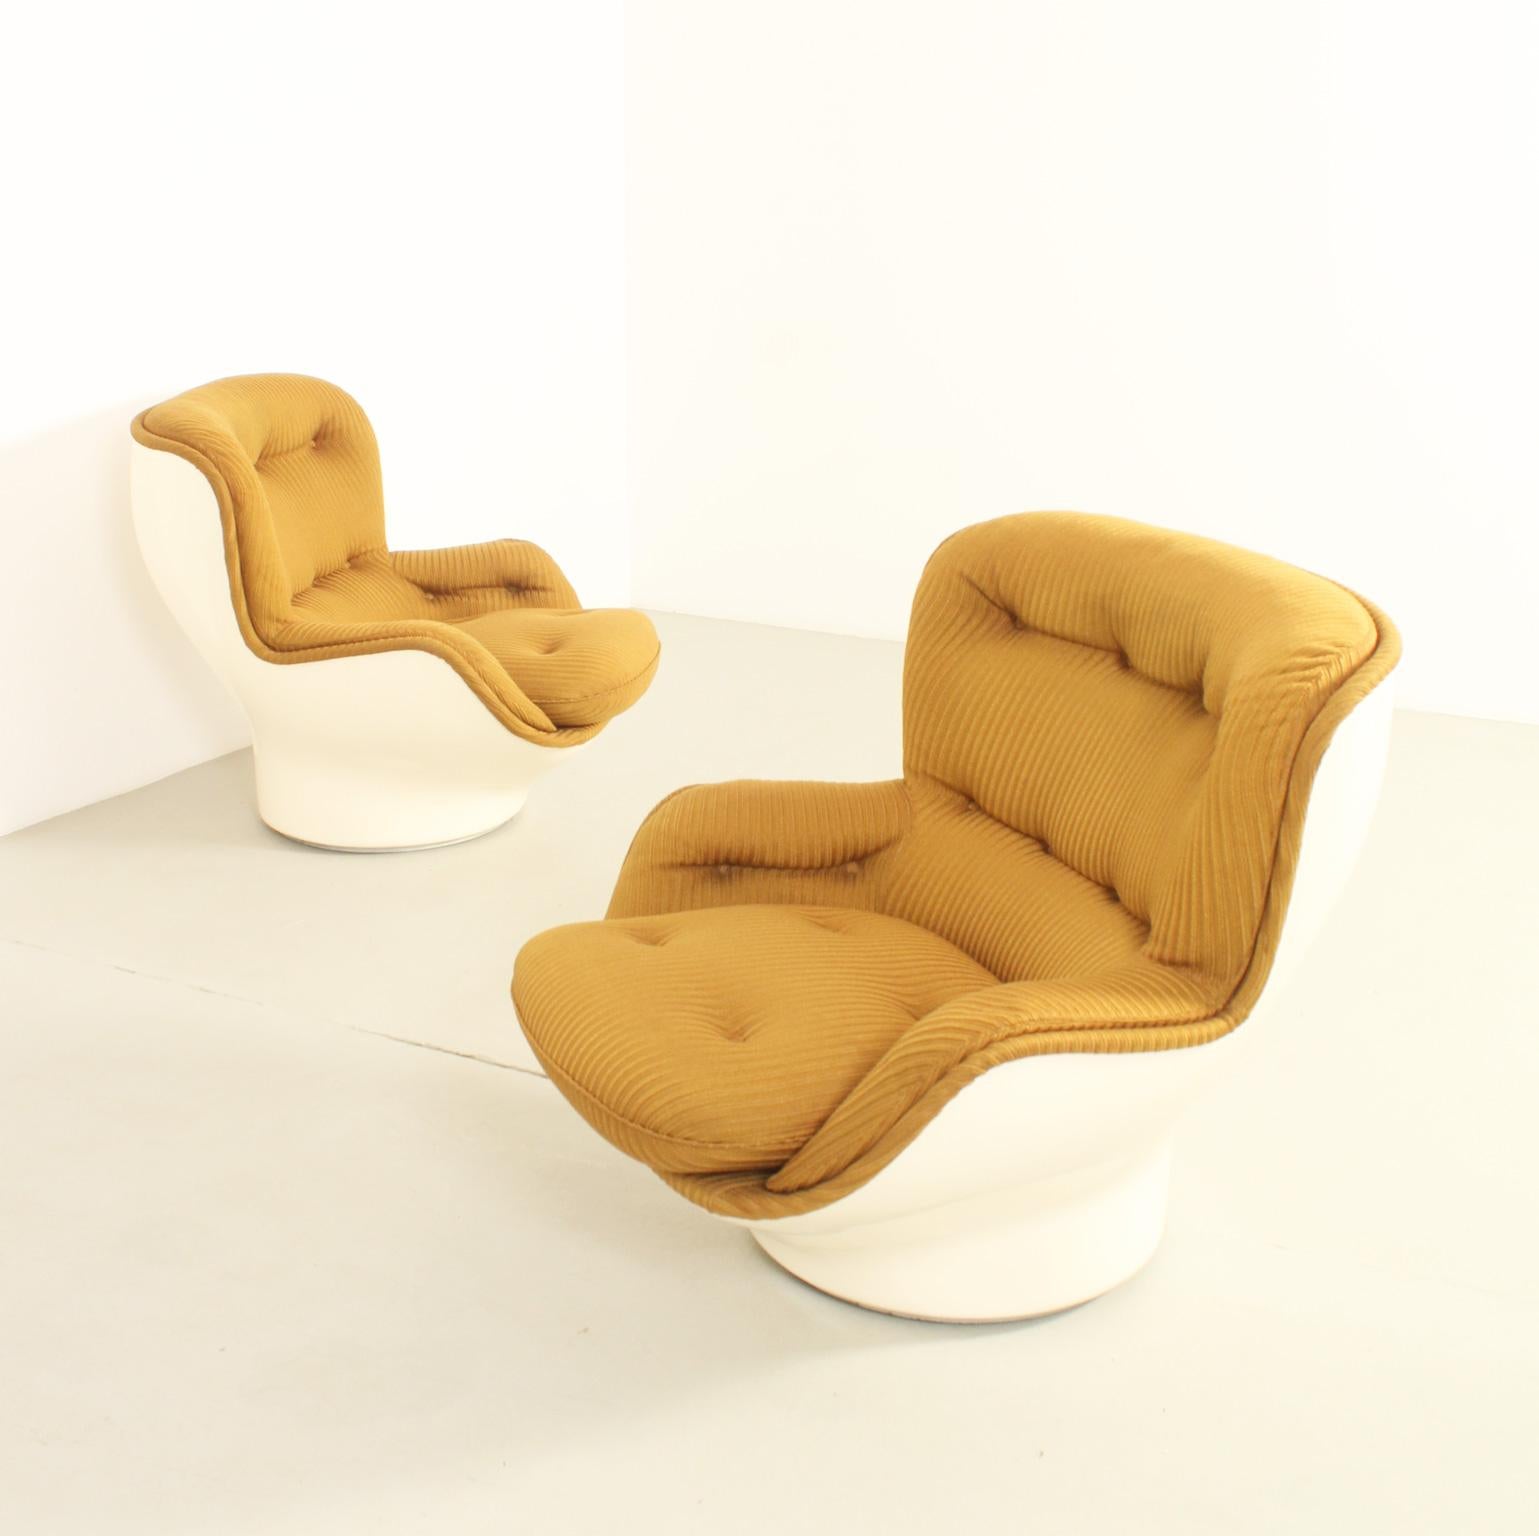 Pair of Karate armchairs designed in 1970's by Michel Cadestin for Airborne, France. Molded fiberglass shell upholstered with original fabric and loose seat cushion. Swivel base. 